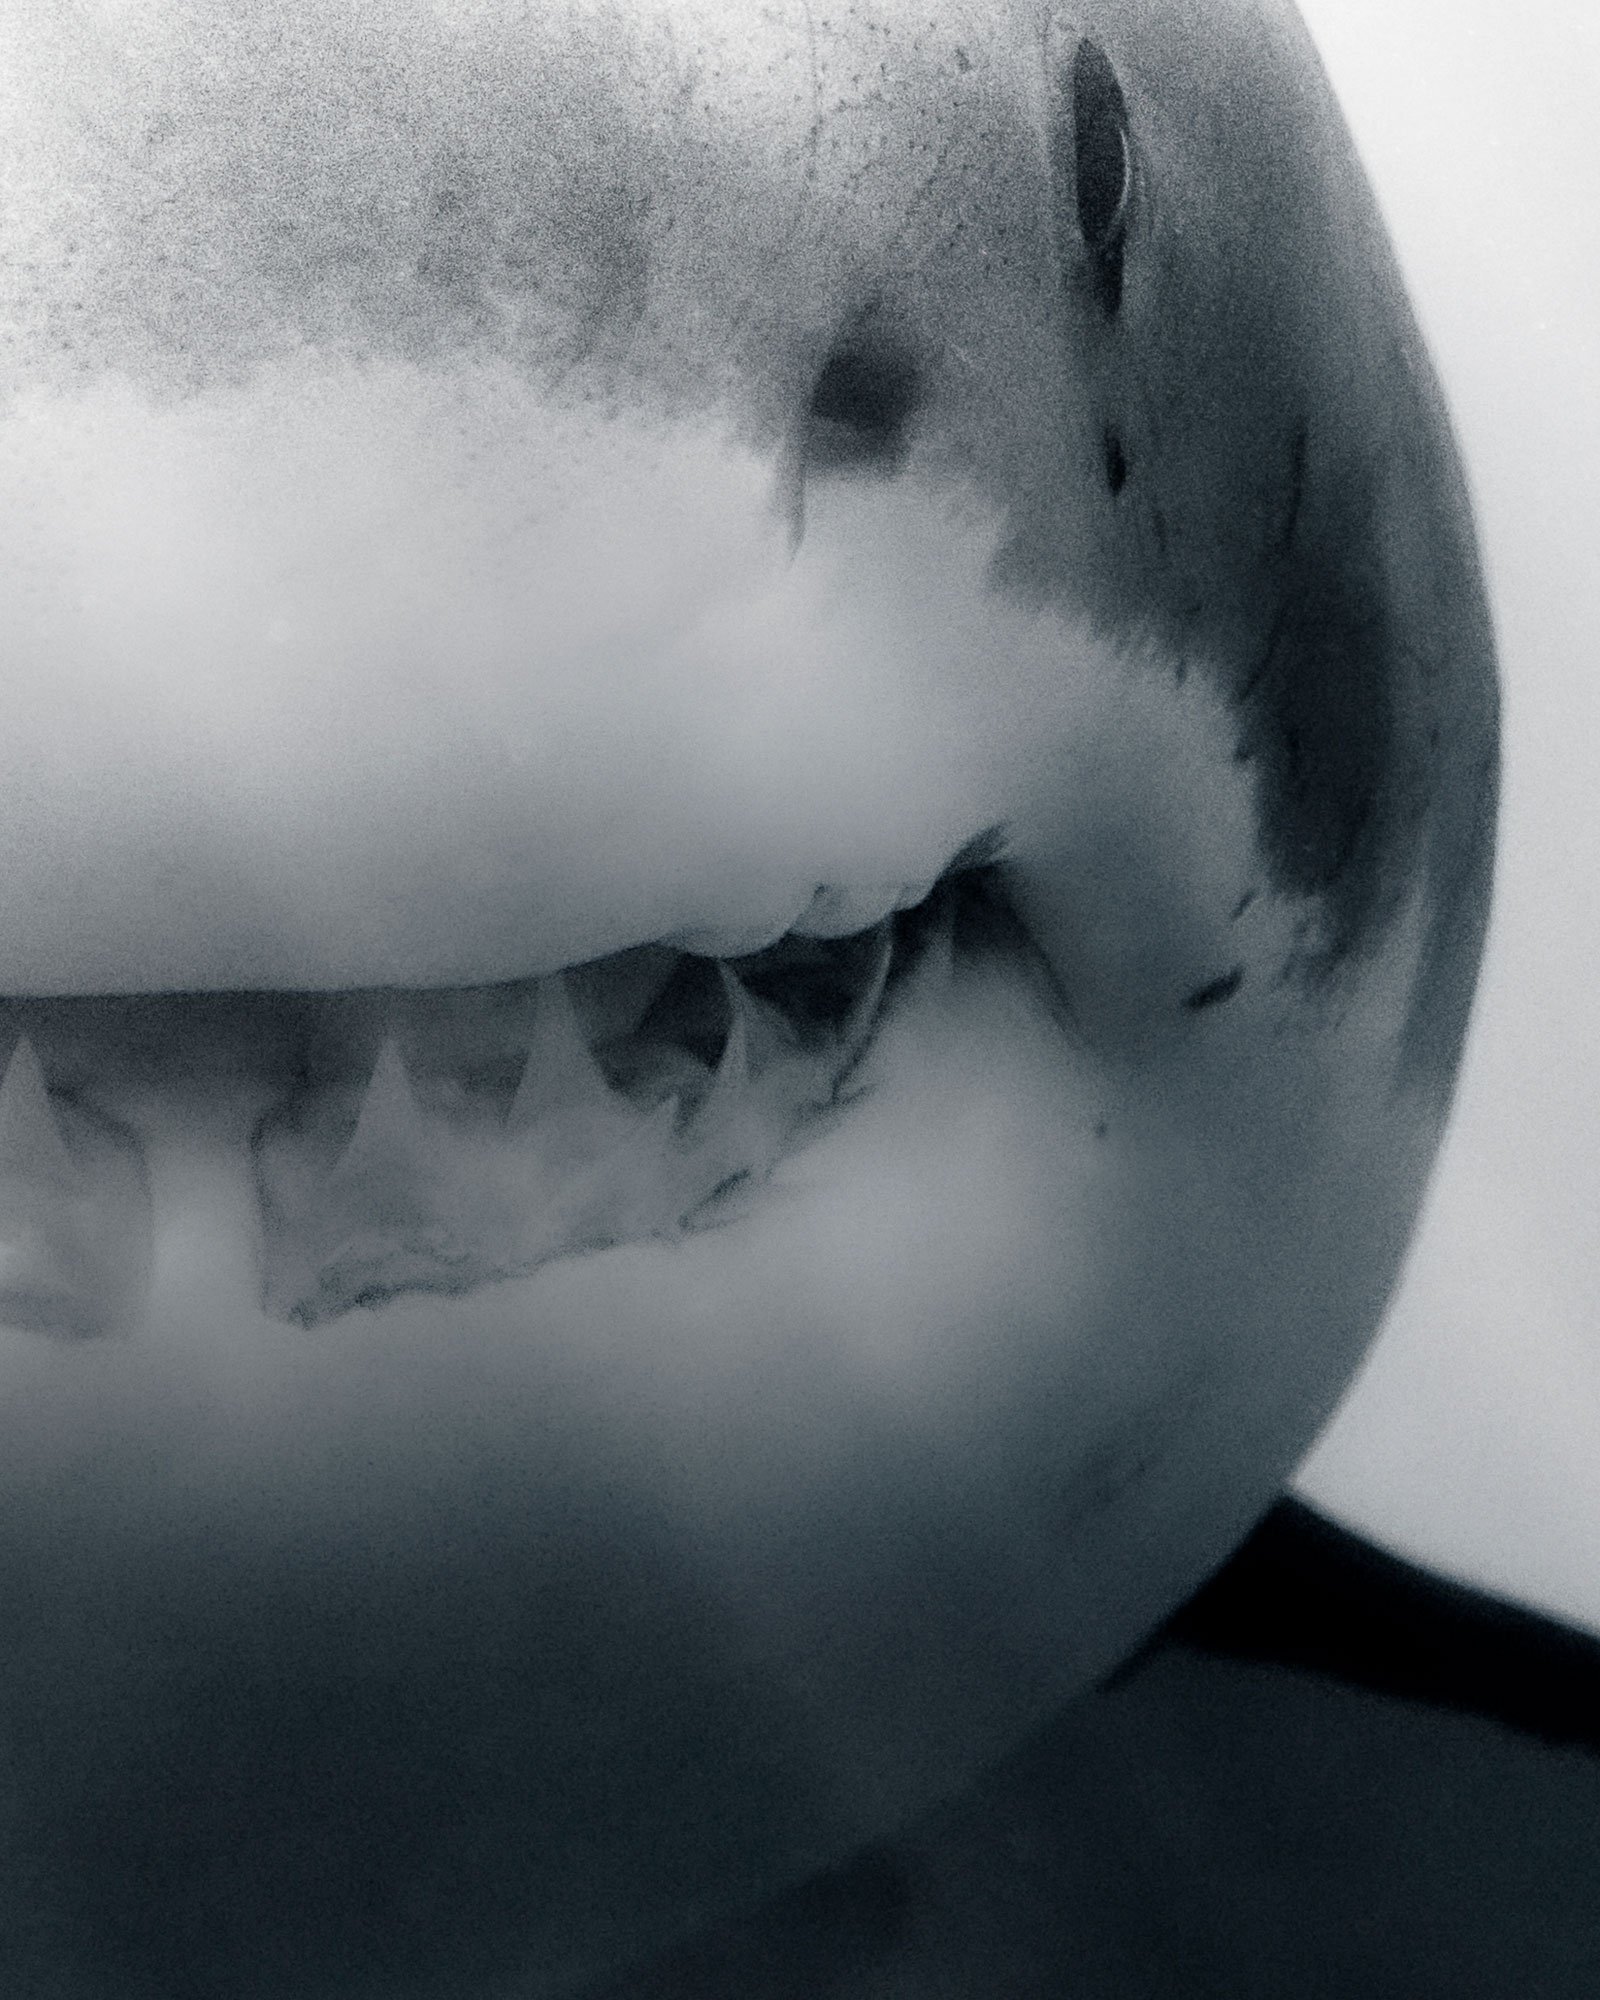 up close shot of shark' mouth in black and white